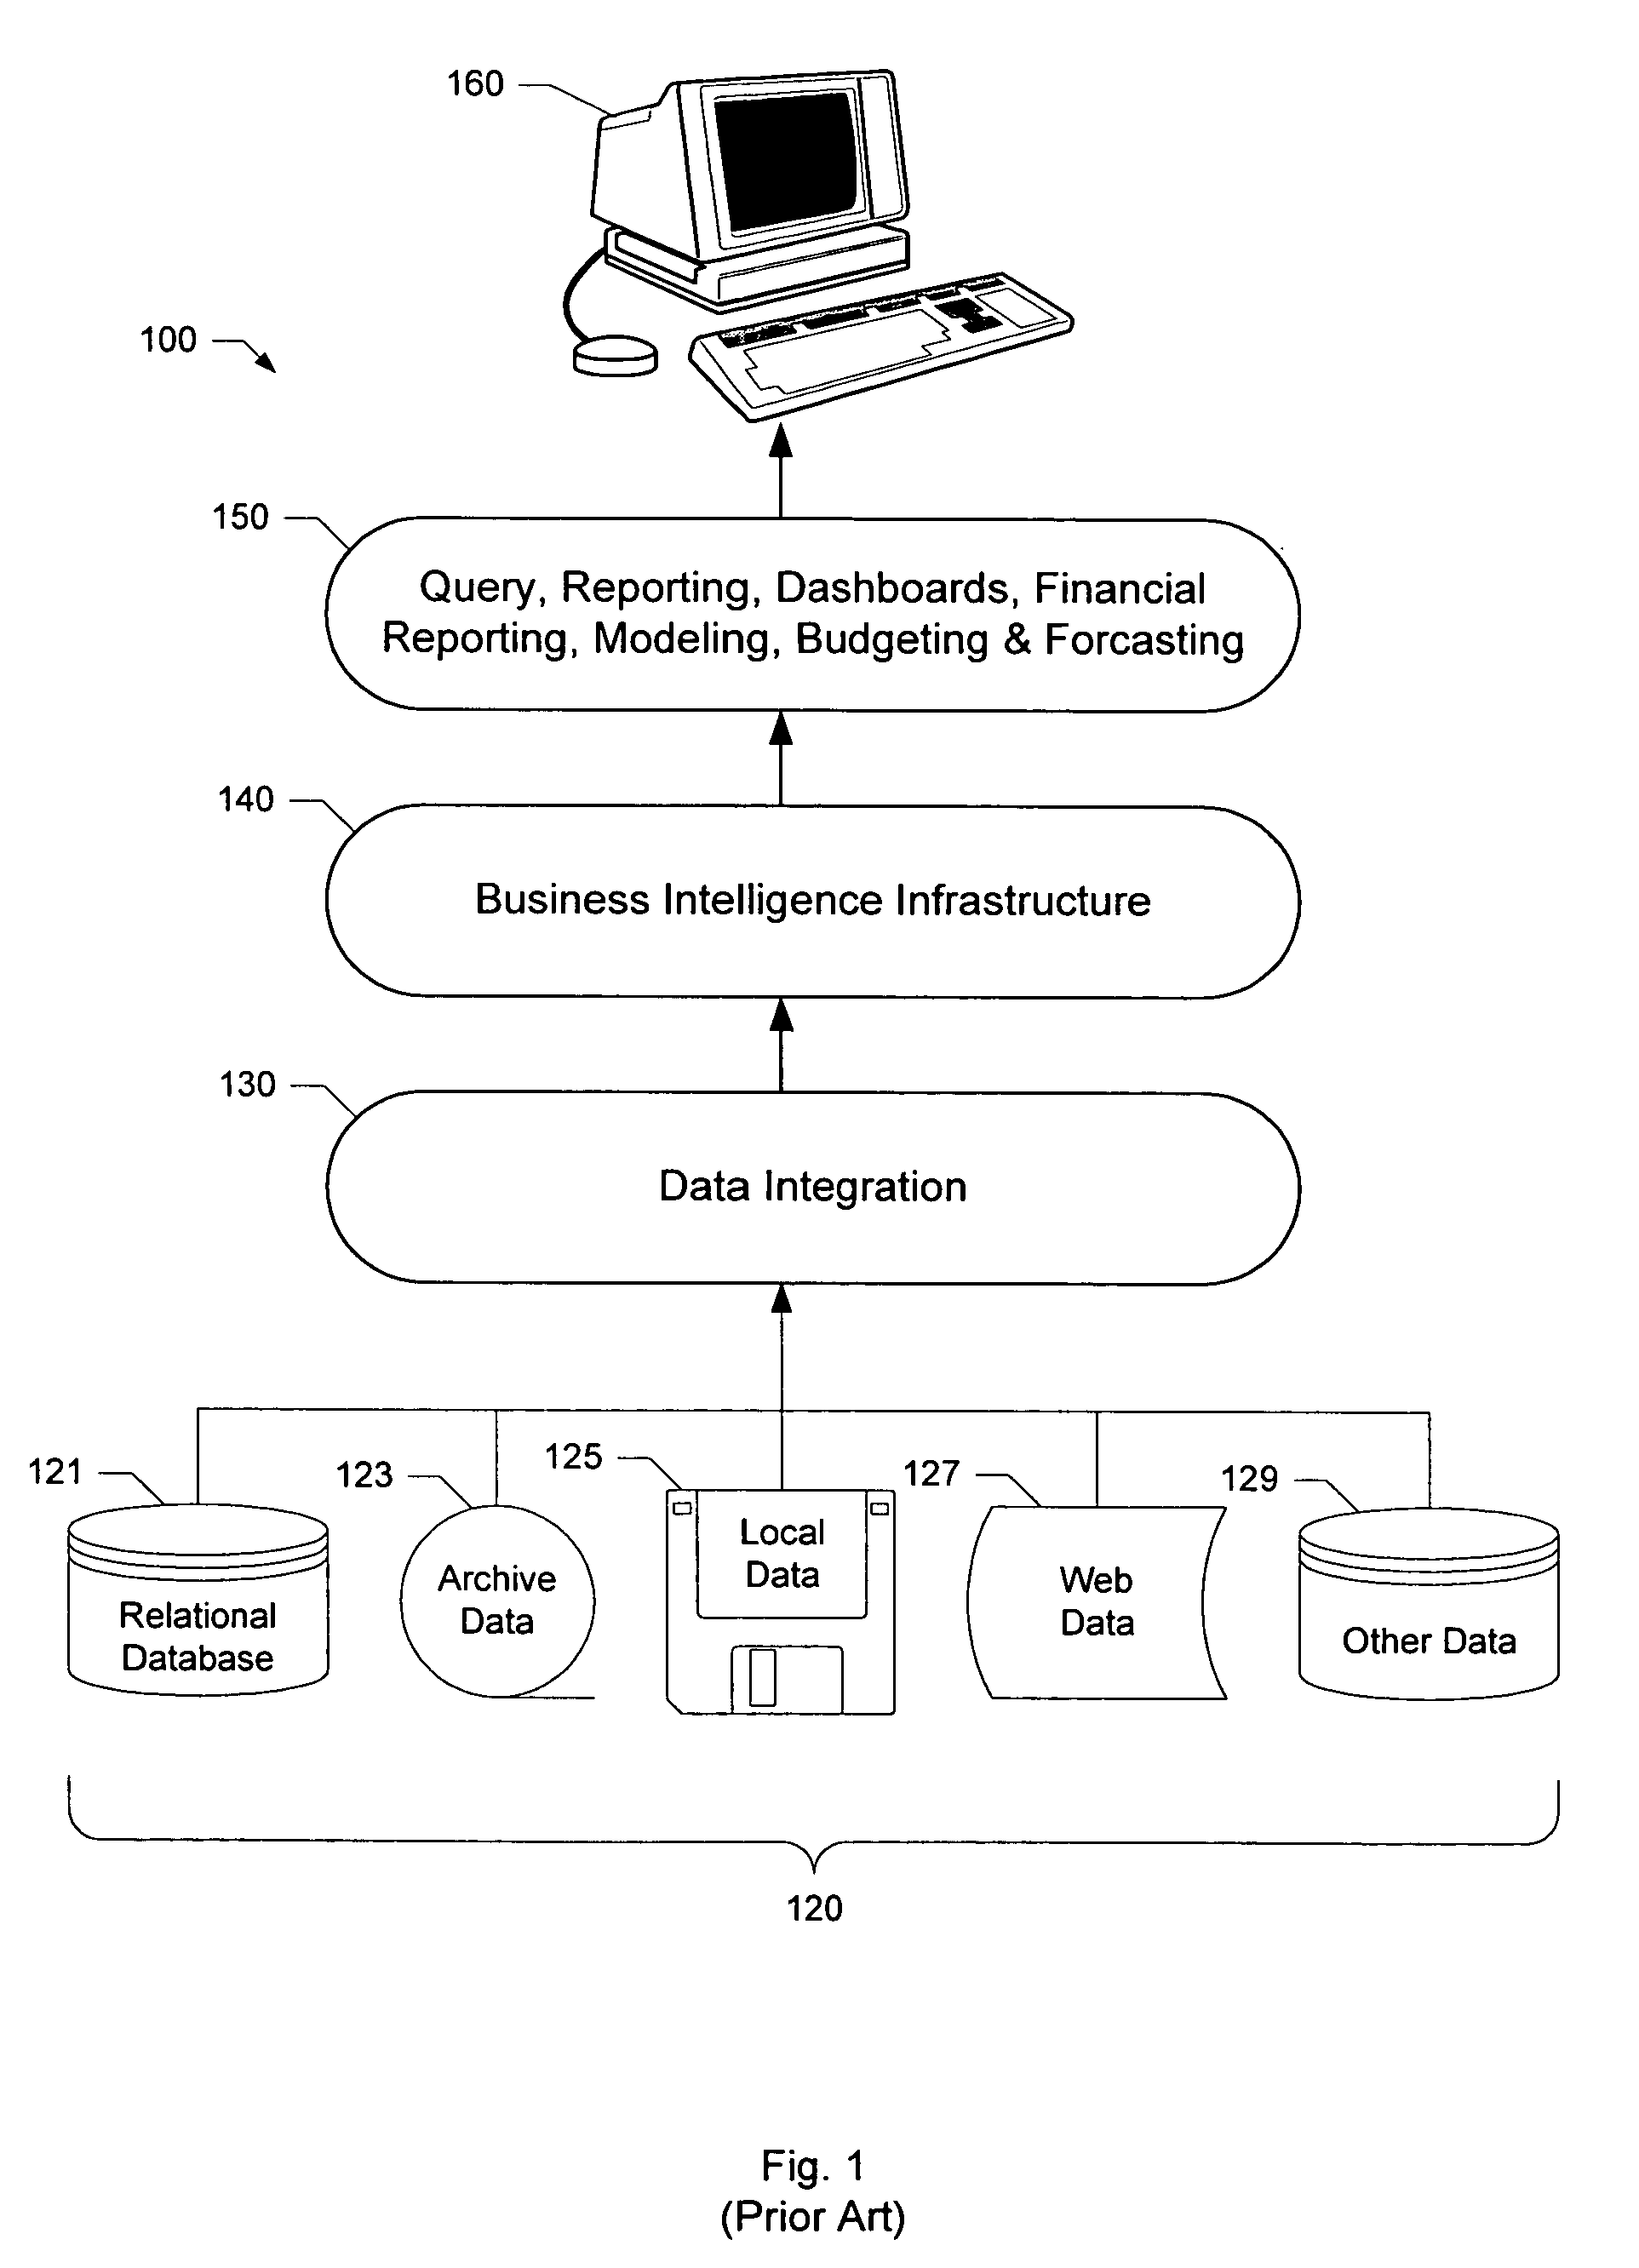 Method and apparatus for automatically providing expert analysis-based advice